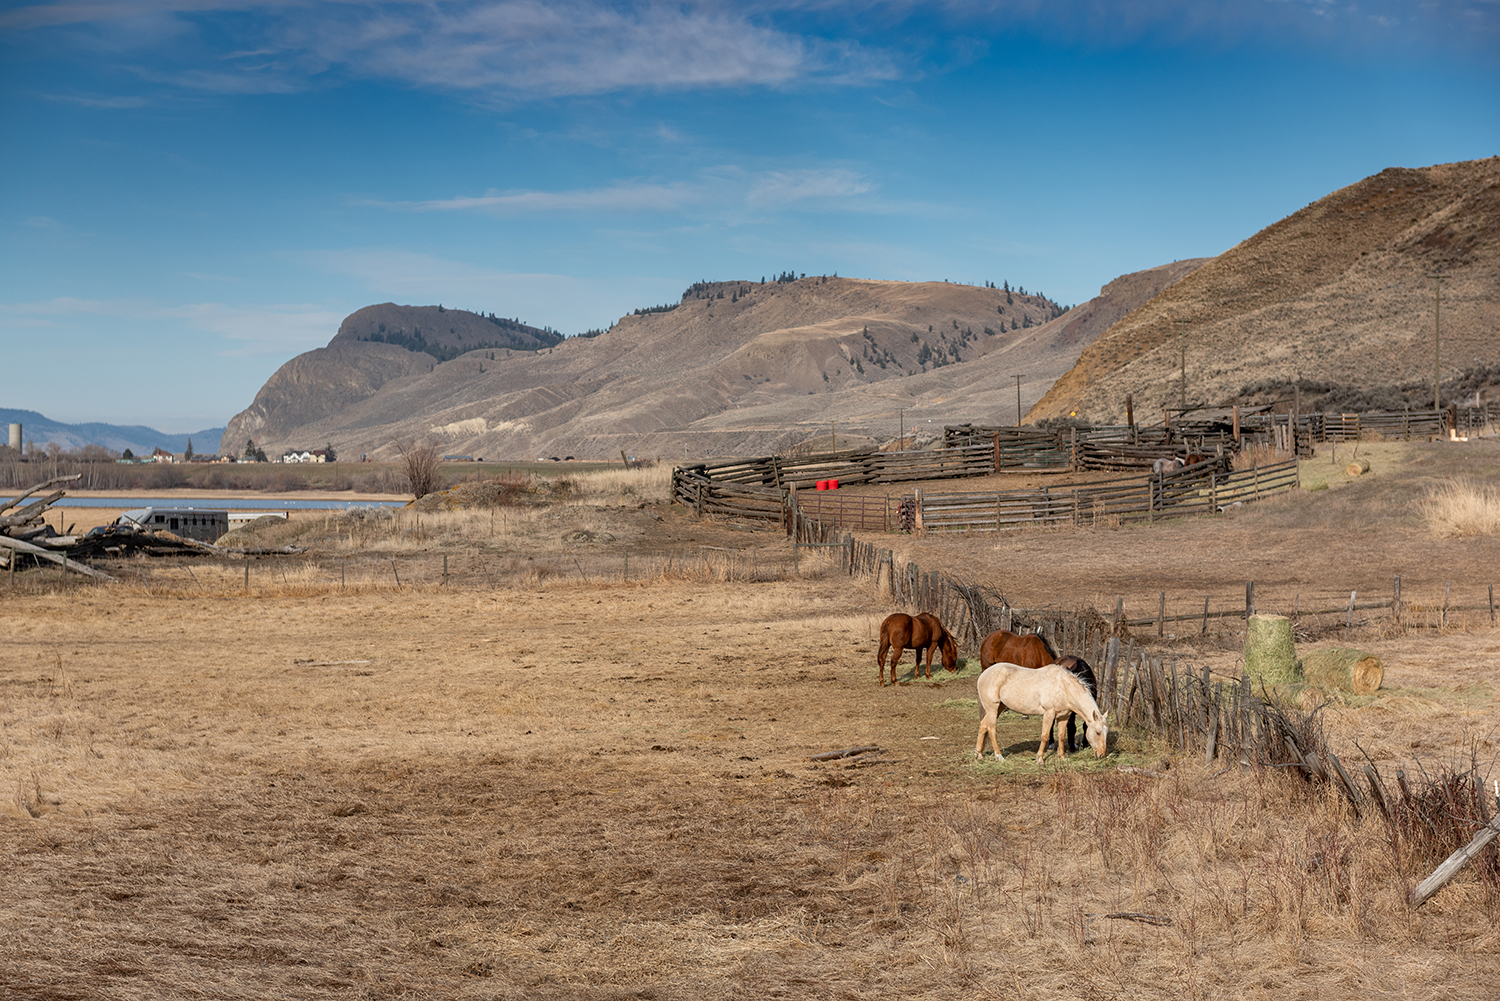 Kamloops rural life with ponies grazing with mountains and blue sky